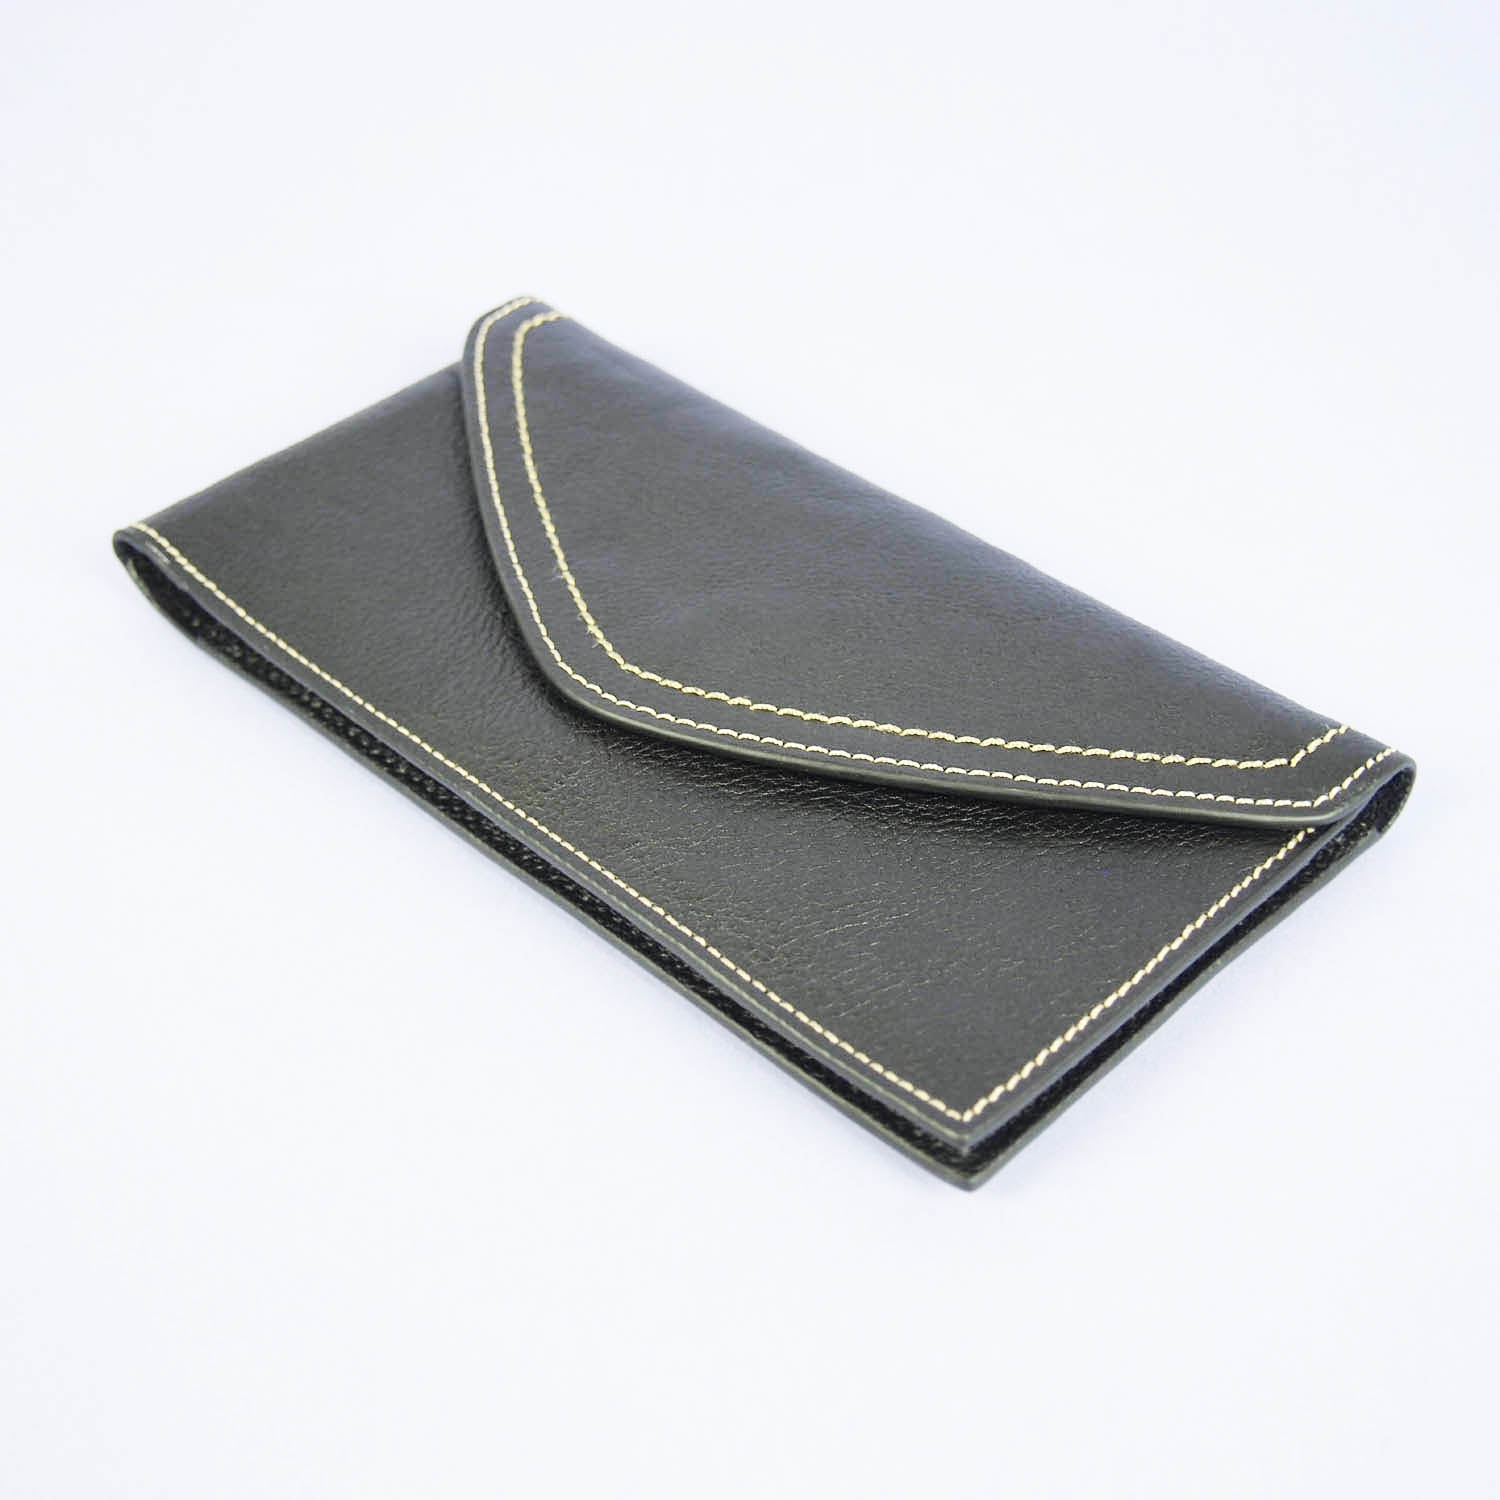 Butterfield bice Wallet Front View